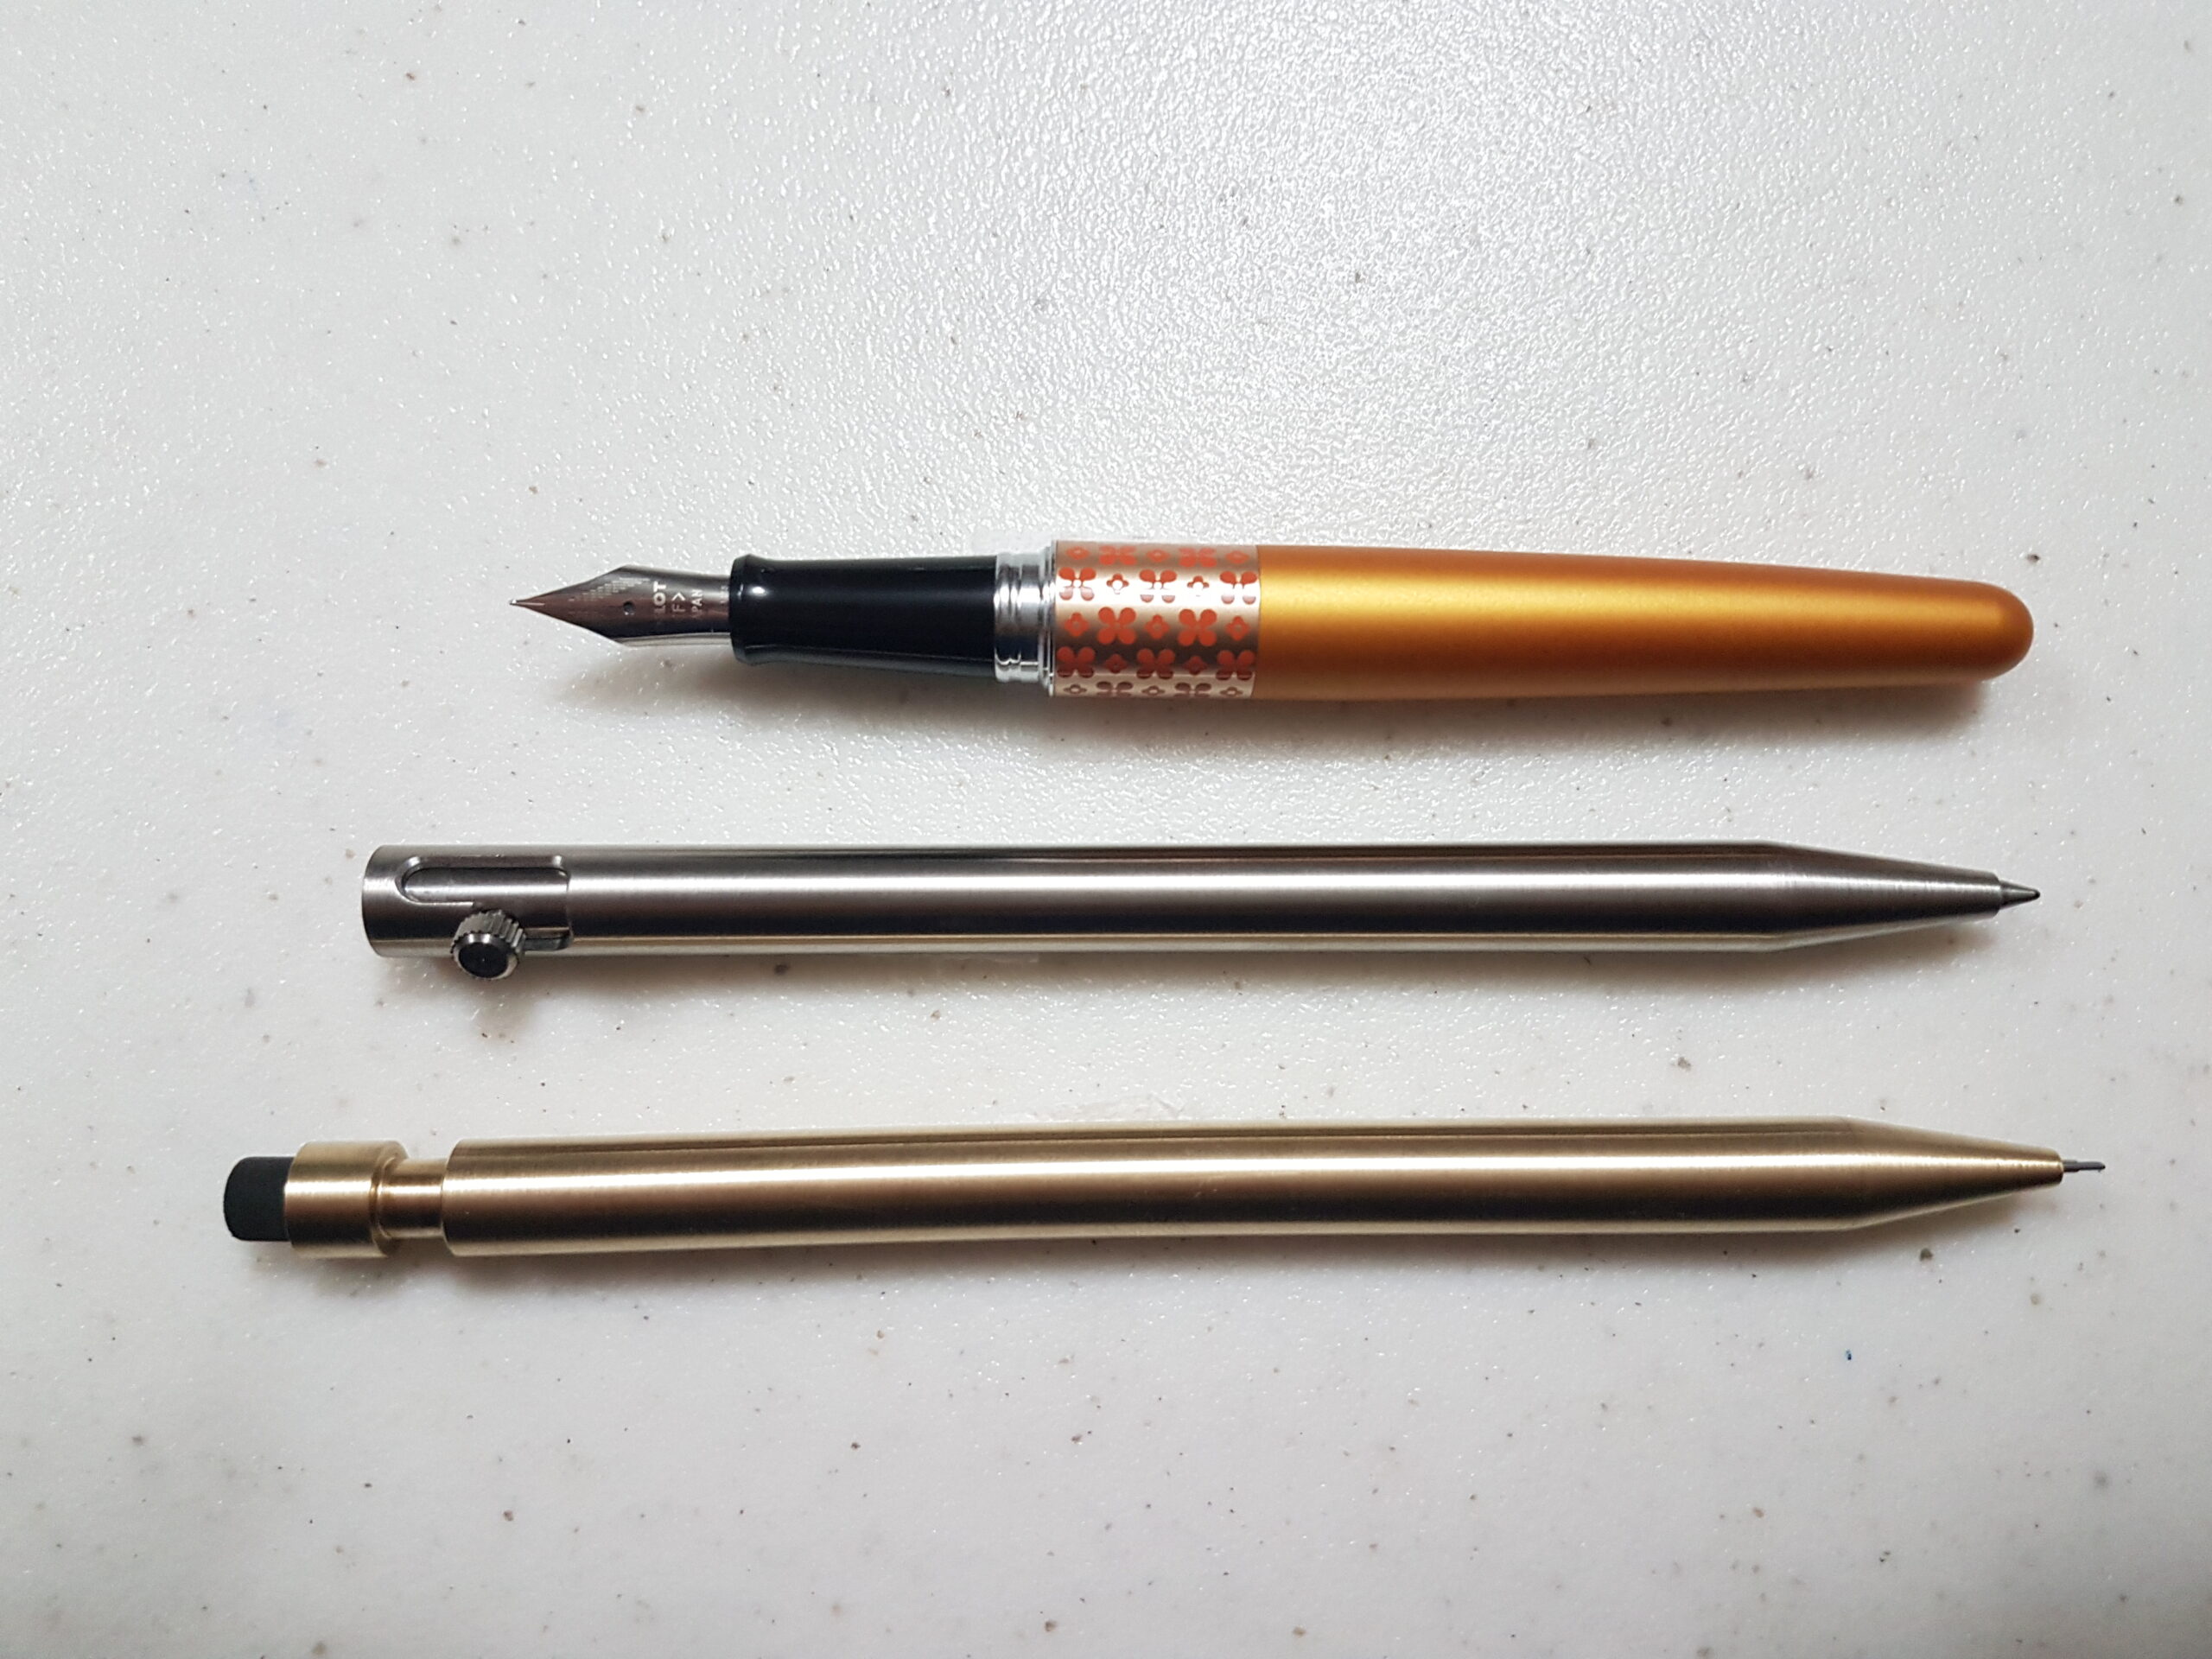 Modern Fuel Pencil Review | Hey there! SBREBrown